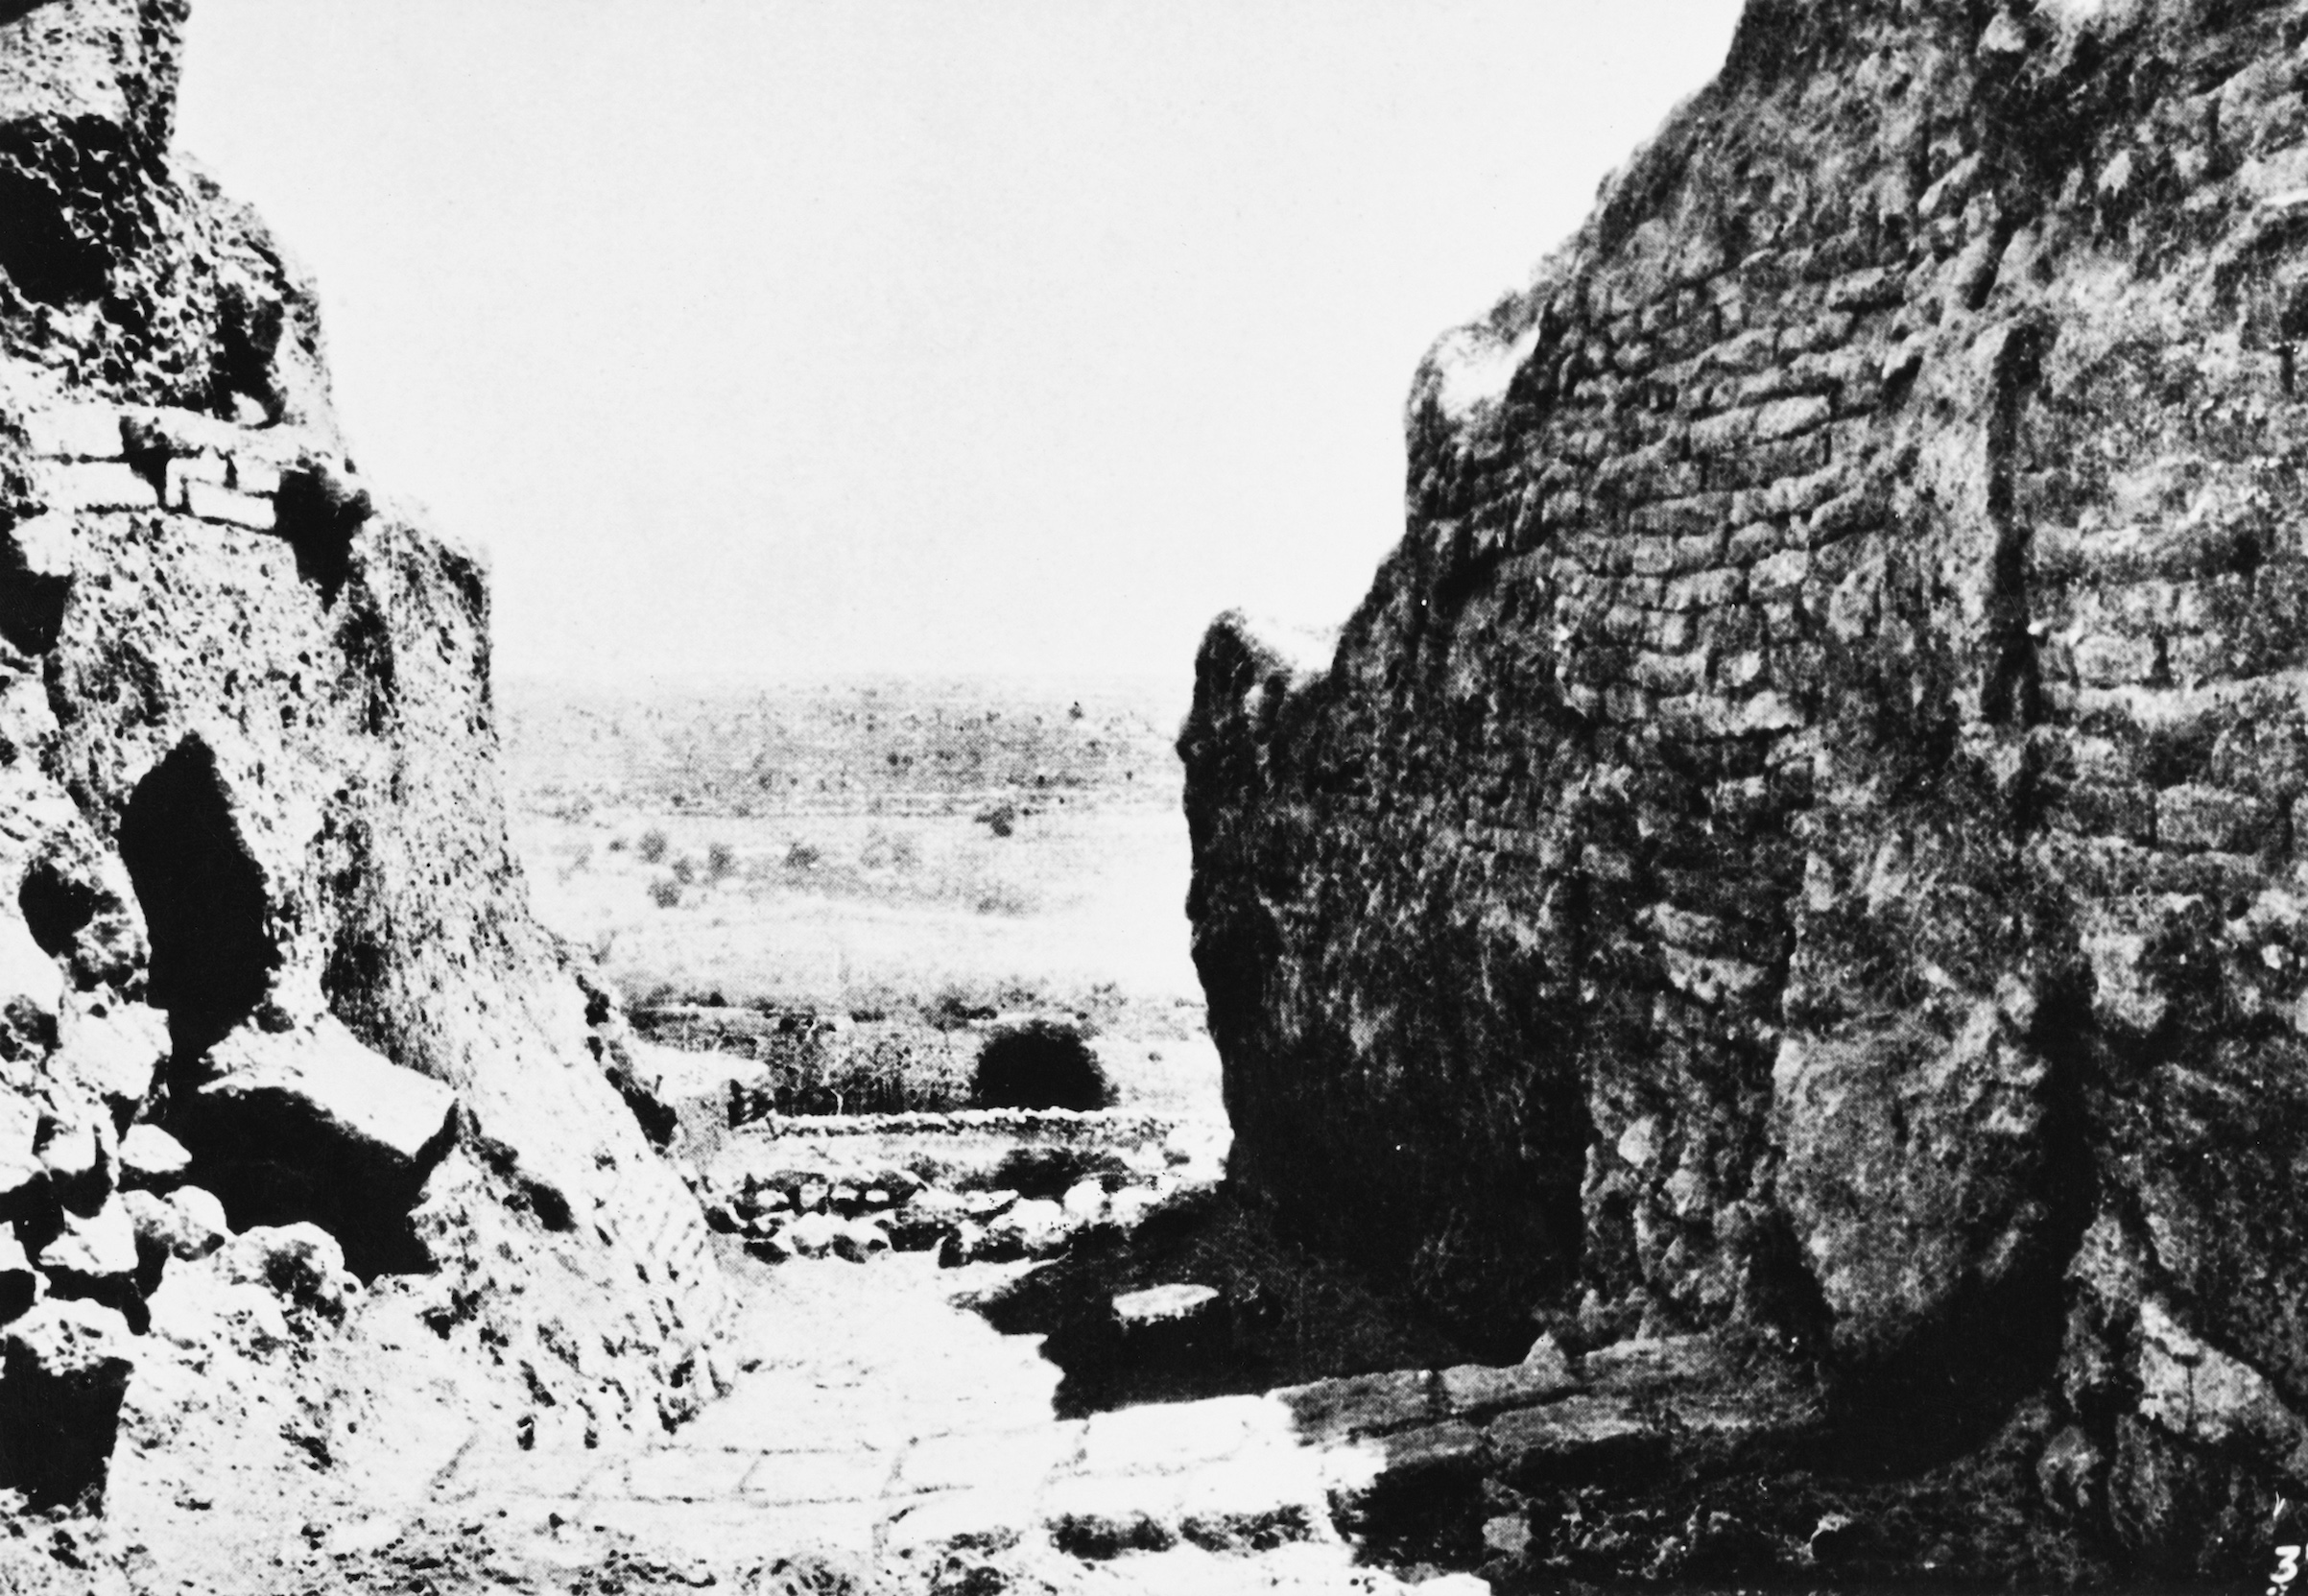 Walls in the ancient city of Jericho, during the 1907 - 1909 excavations of Tell es-Sultan and Tulul Abu el-'Alayiq by German archeologists Ernst Sellin and Carl Watzinger, circa 1909. Original publication: Illustrated London News, Feb. 6, 1909. (Illustrated London News/Getty Images)